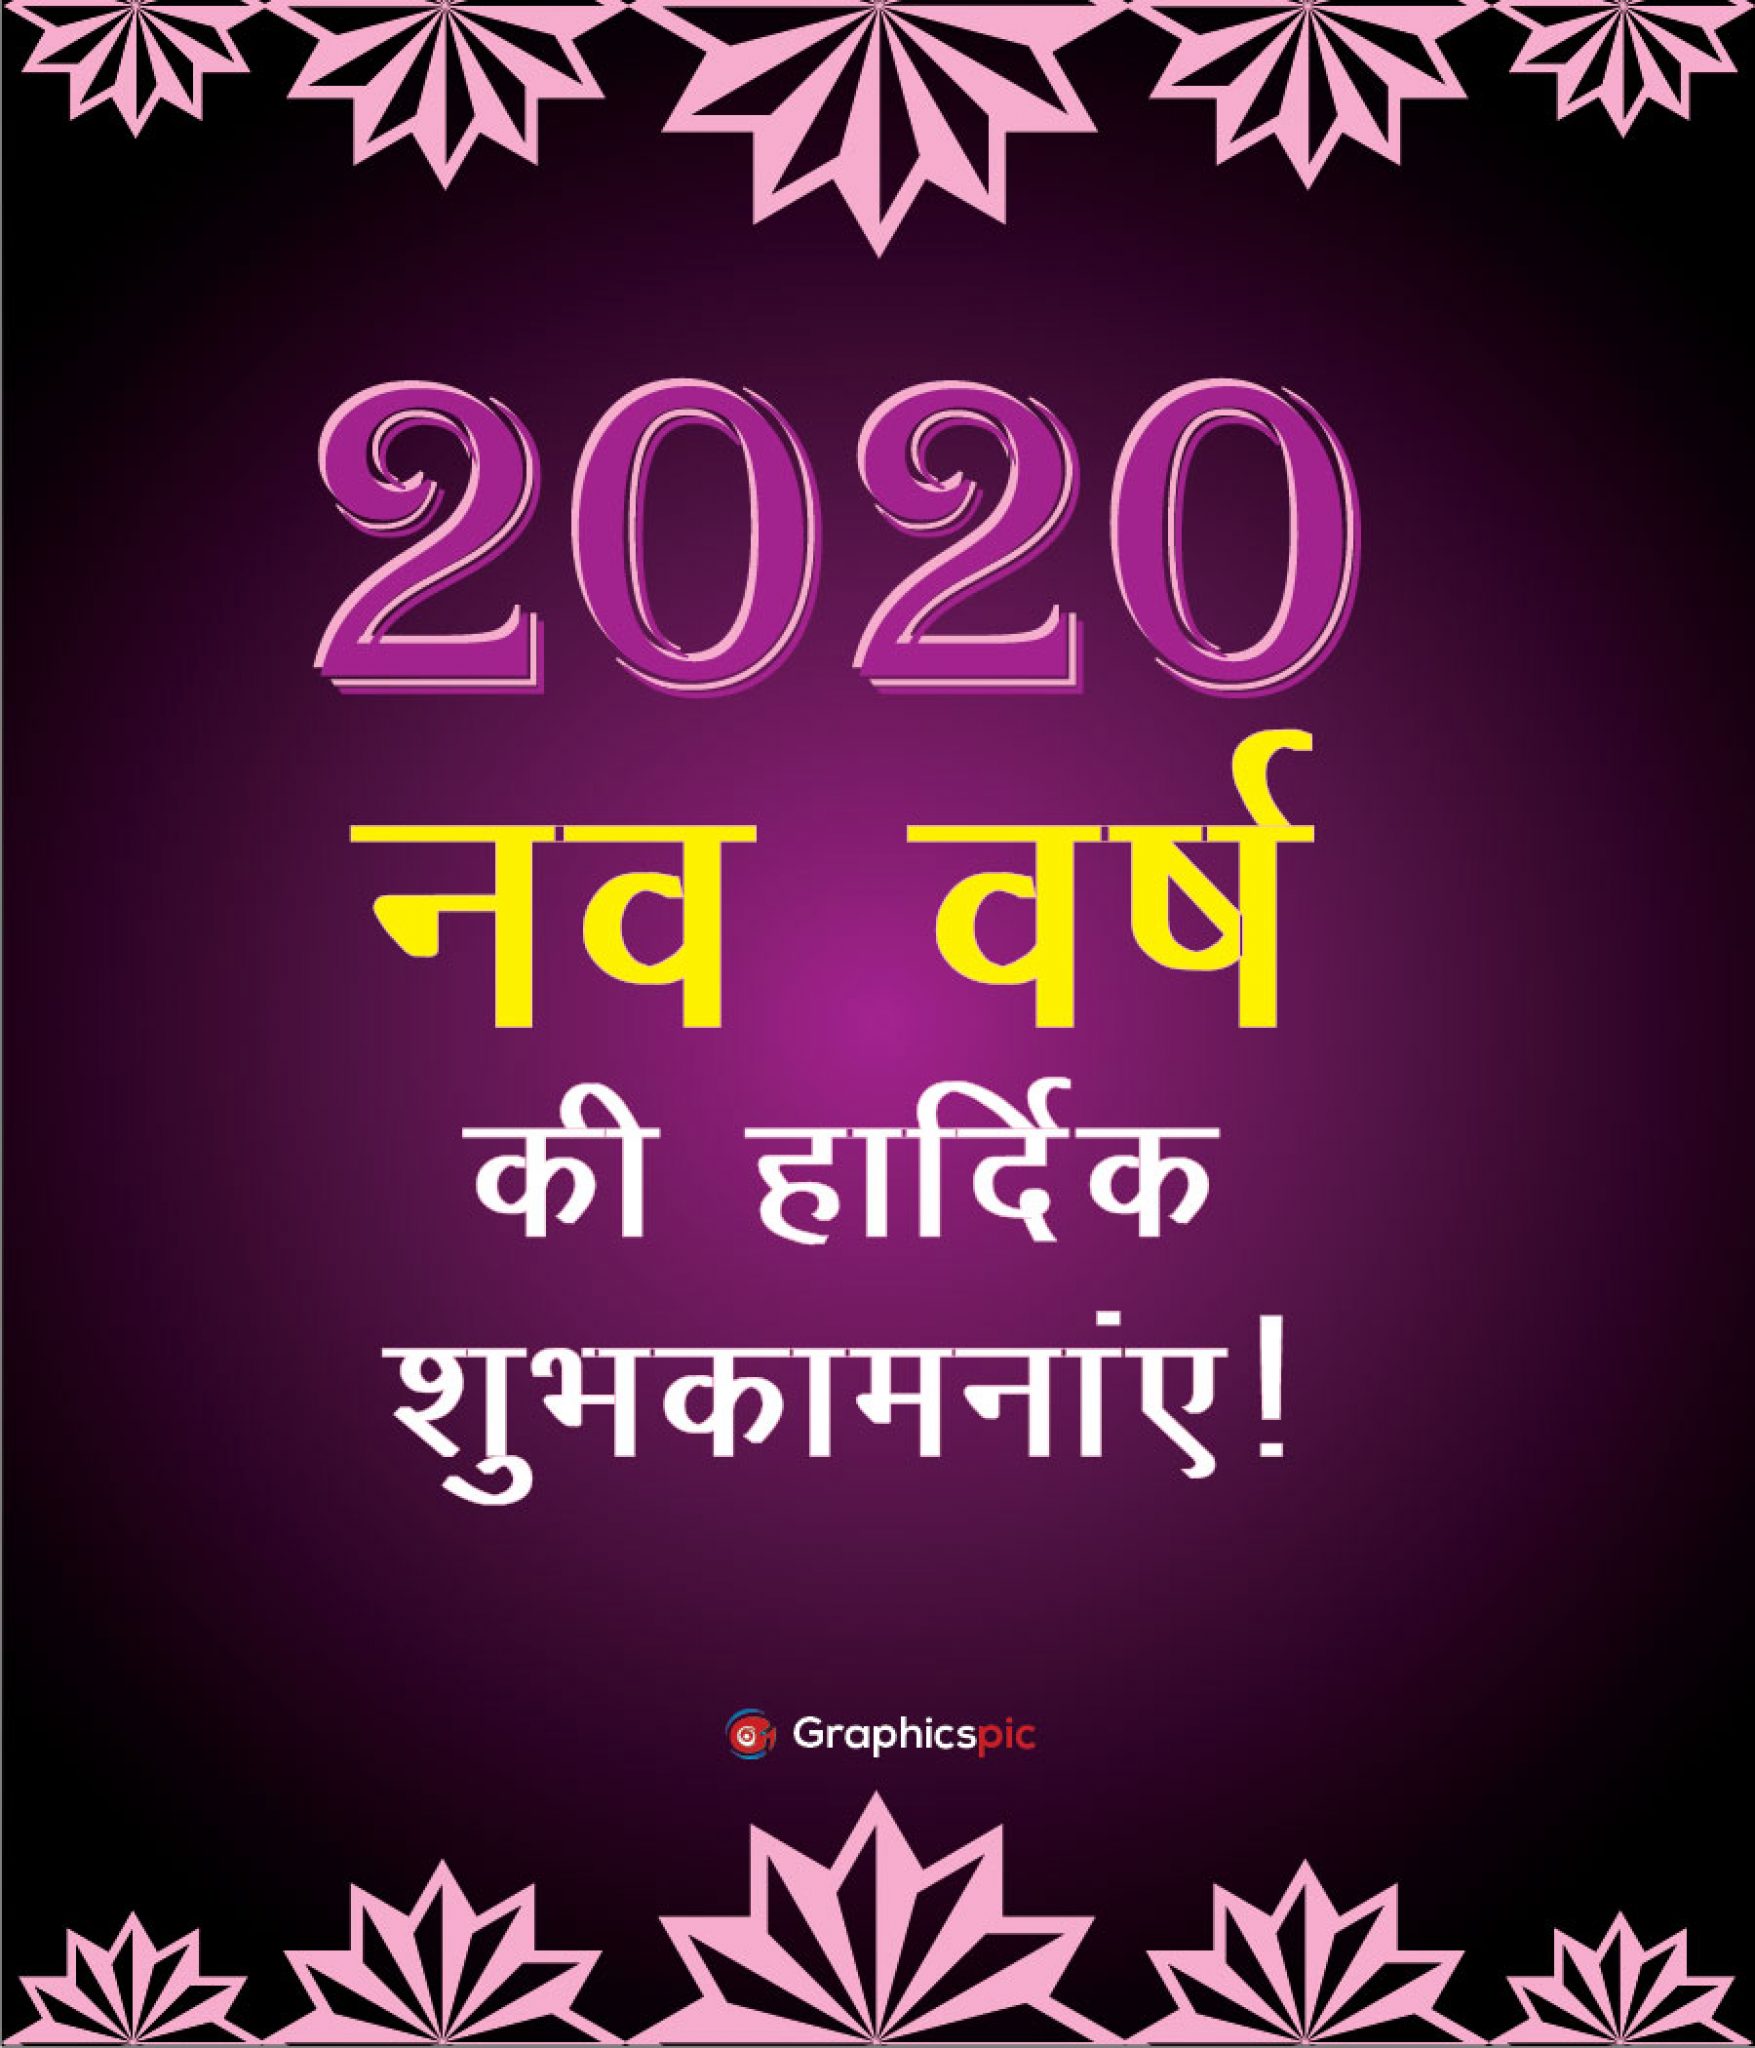 Happy New Year 2020 in Hindi – Free Vector - Graphics Pic